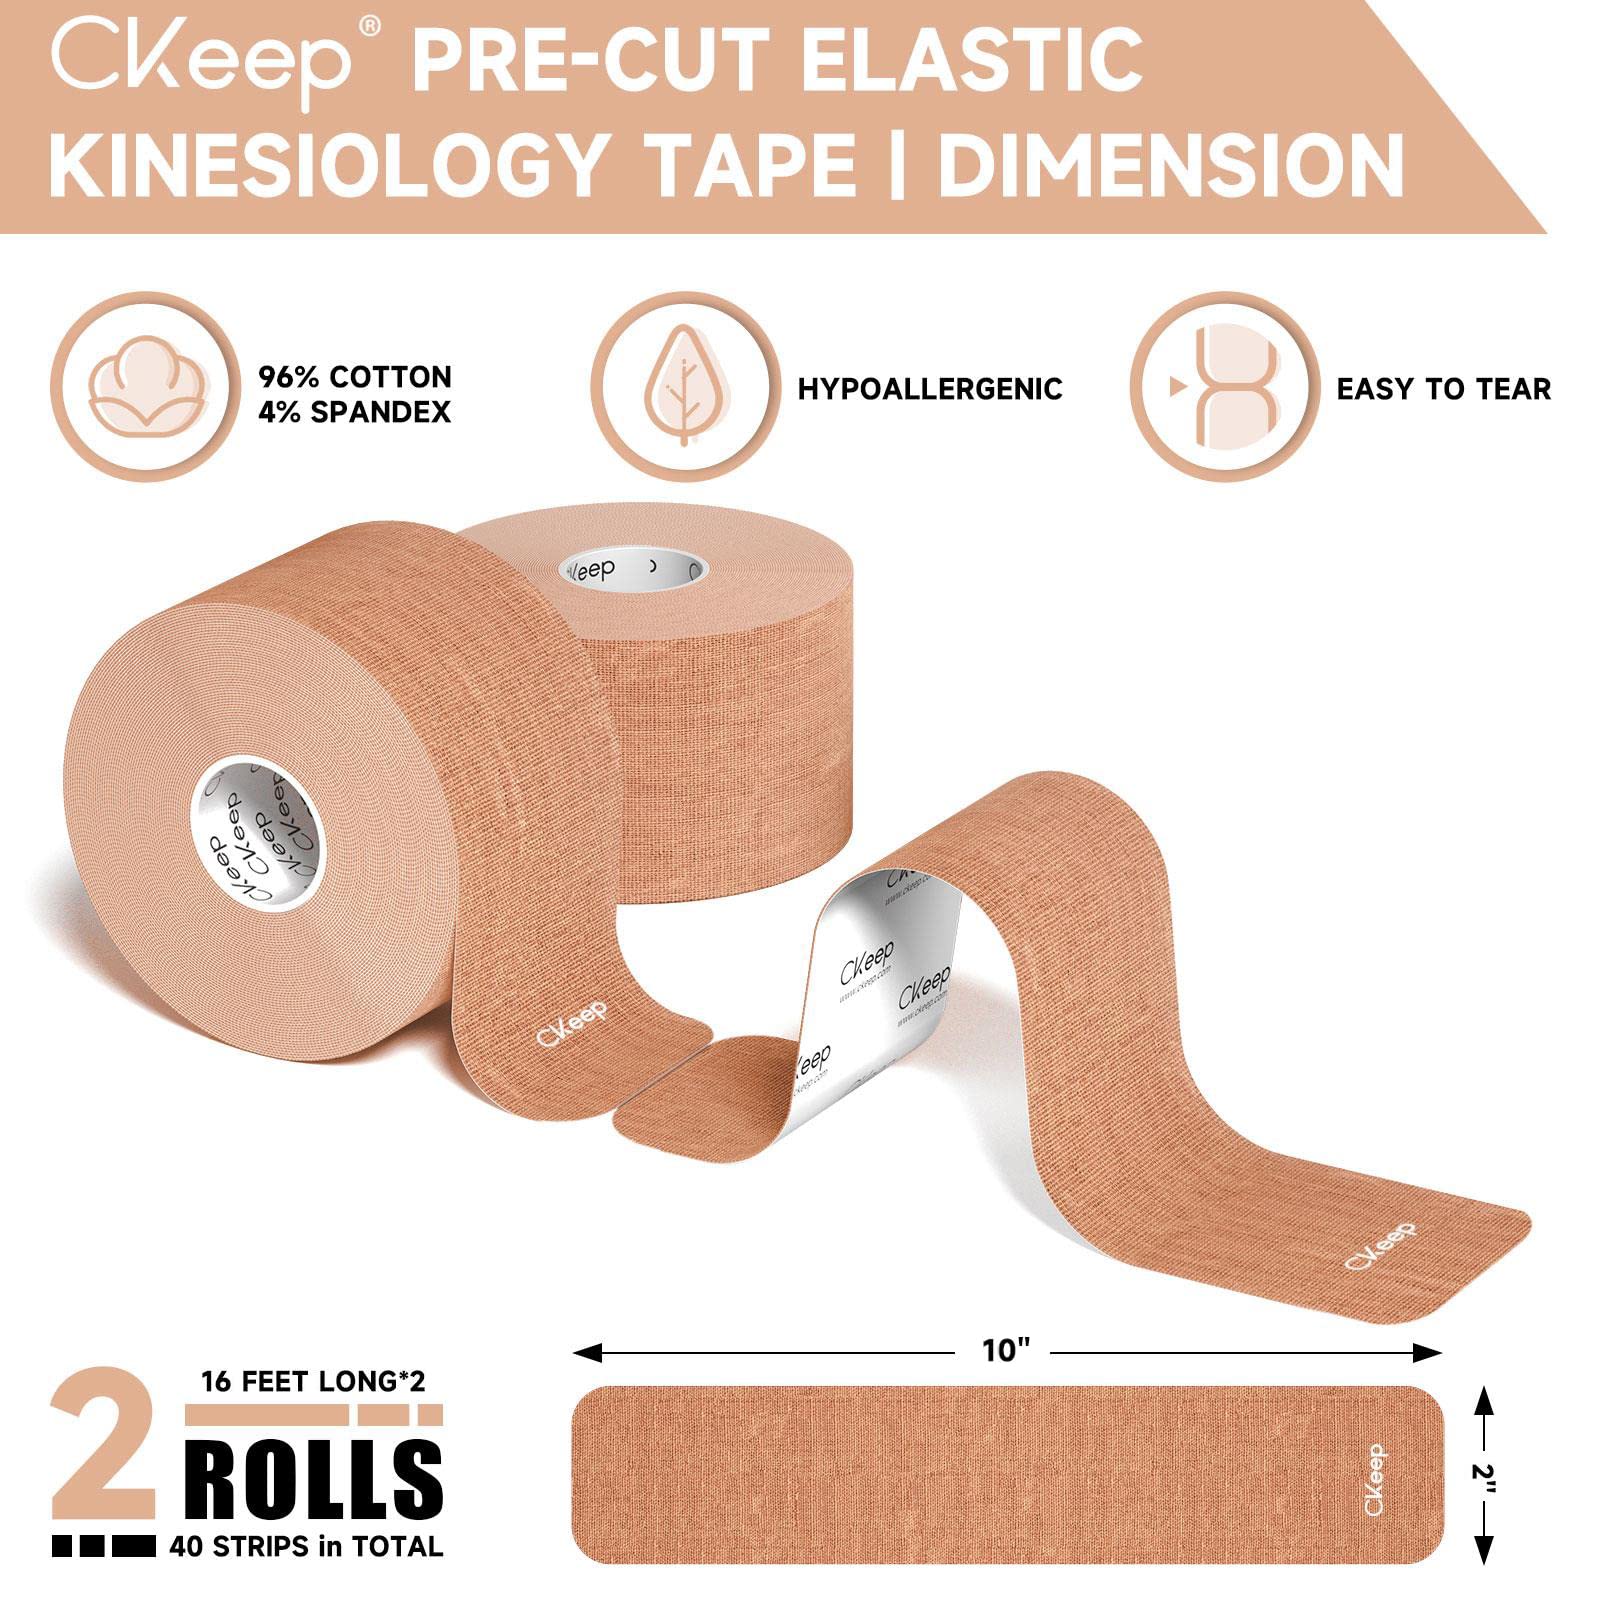 CKeep Kinesiology Tape (2 Rolls), Original Cotton Elastic Premium Athletic Tape,33 ft 40 Precut Strips in Total,Hypoallergenic and Waterproof K Tape for Muscle Pain Relief and Joint Support